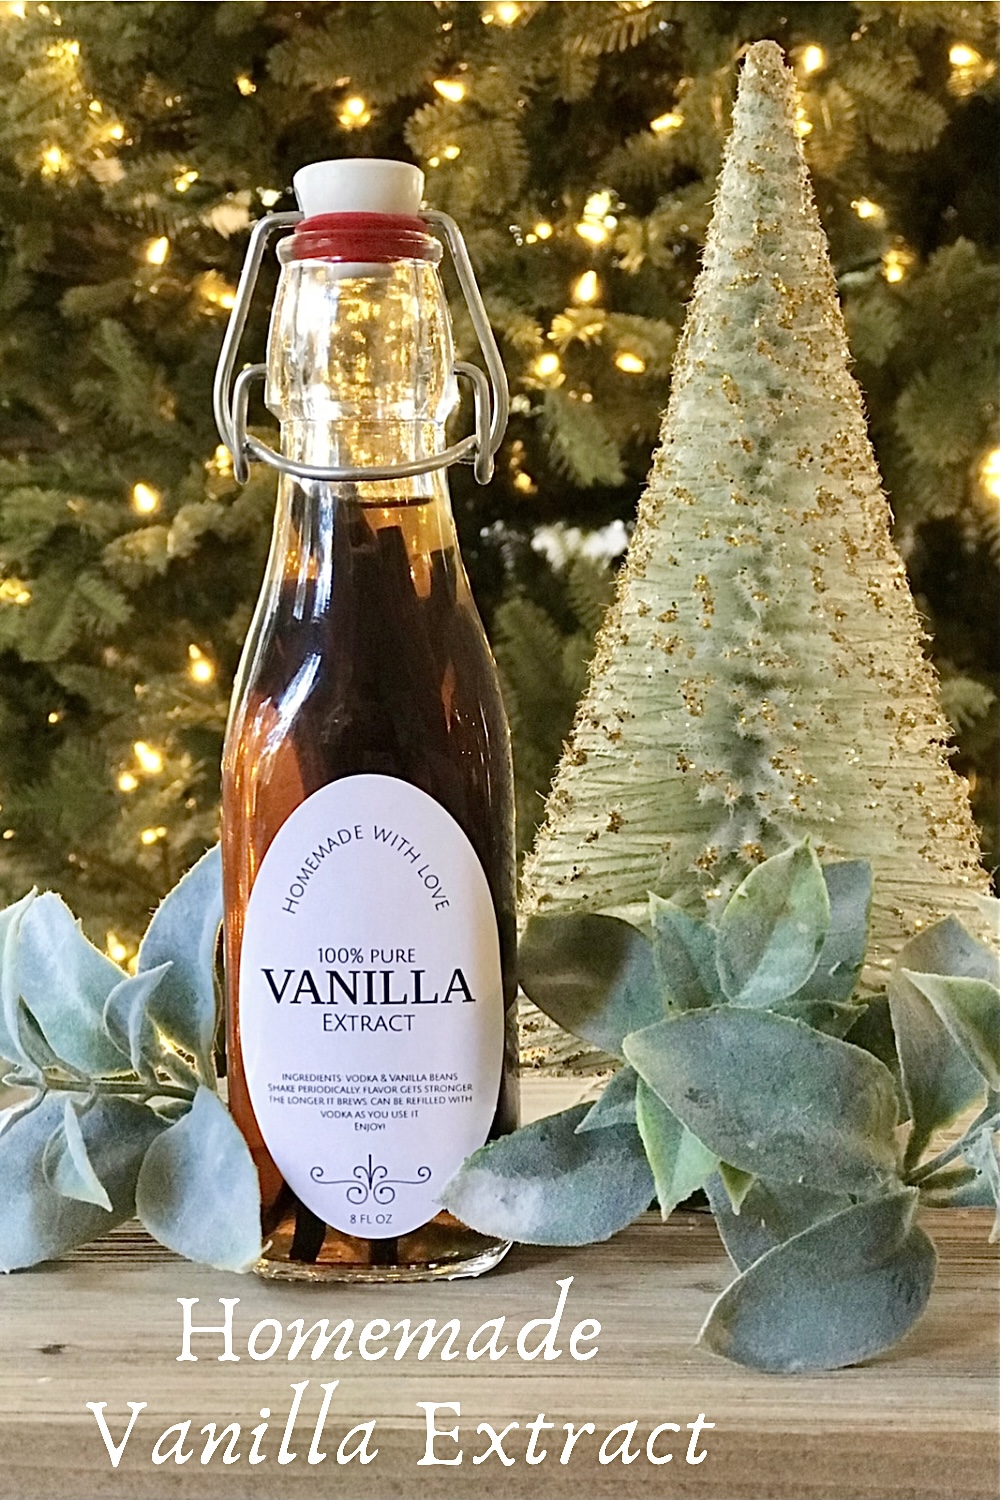 A bottle of homemade vanilla extract on the table in front of a Christmas tree.  